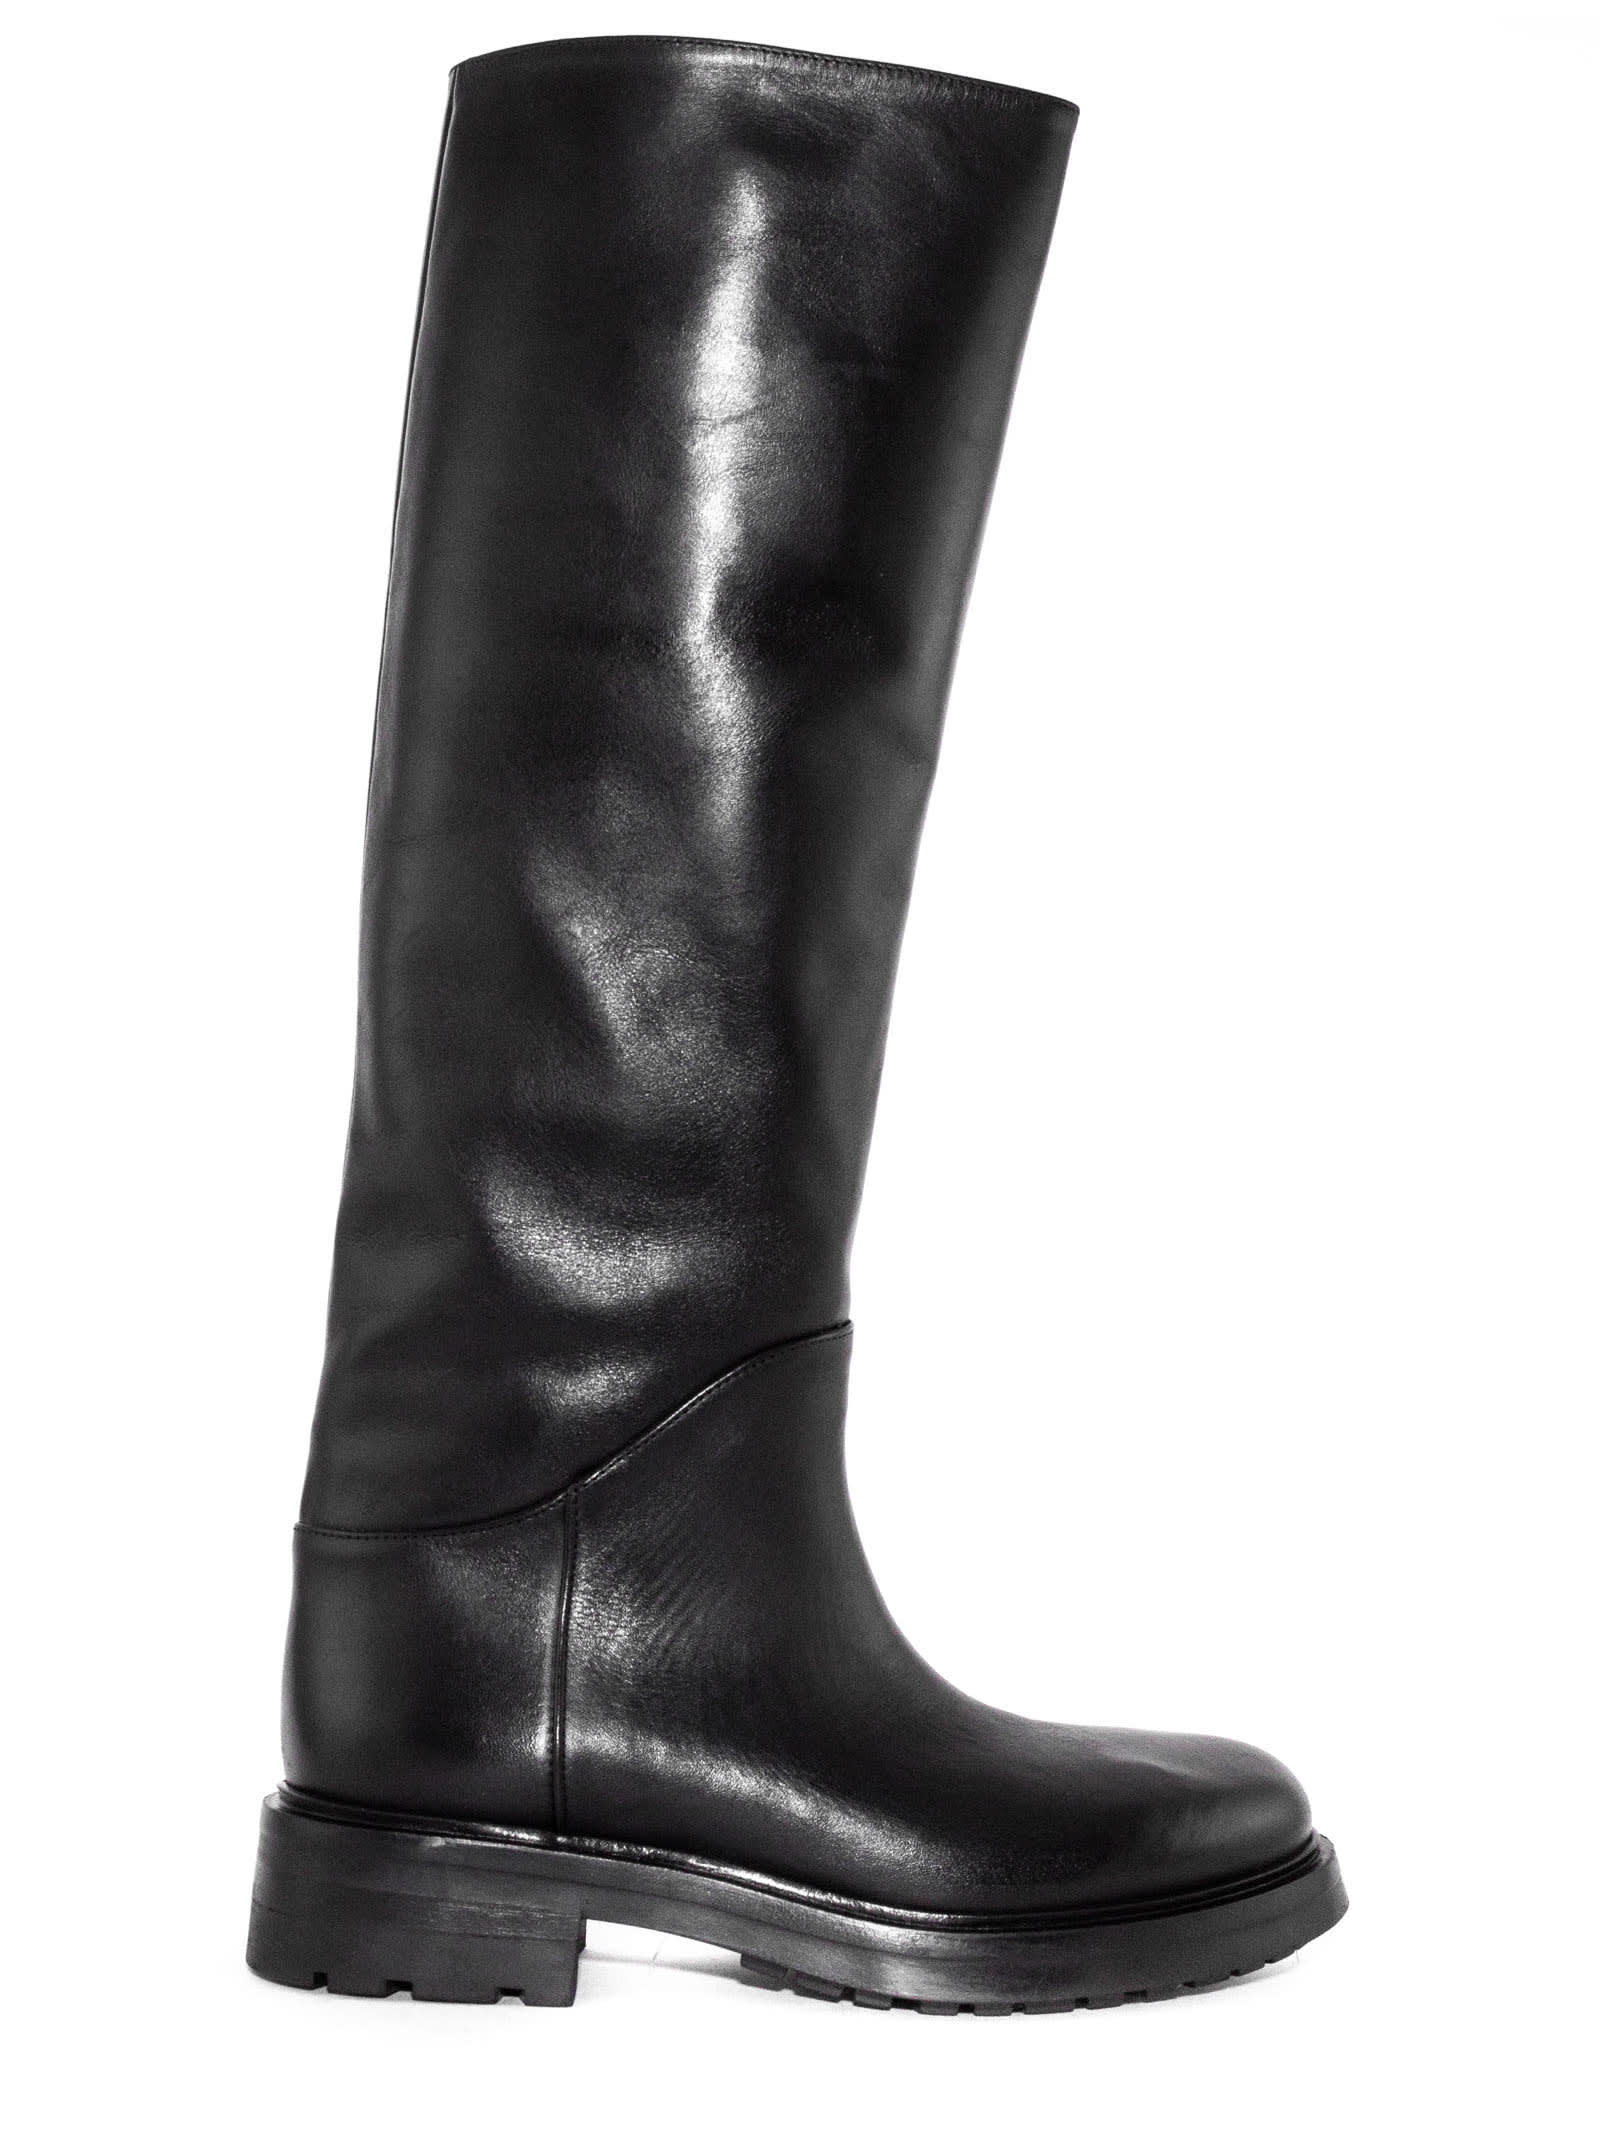 Black Leather High Boots